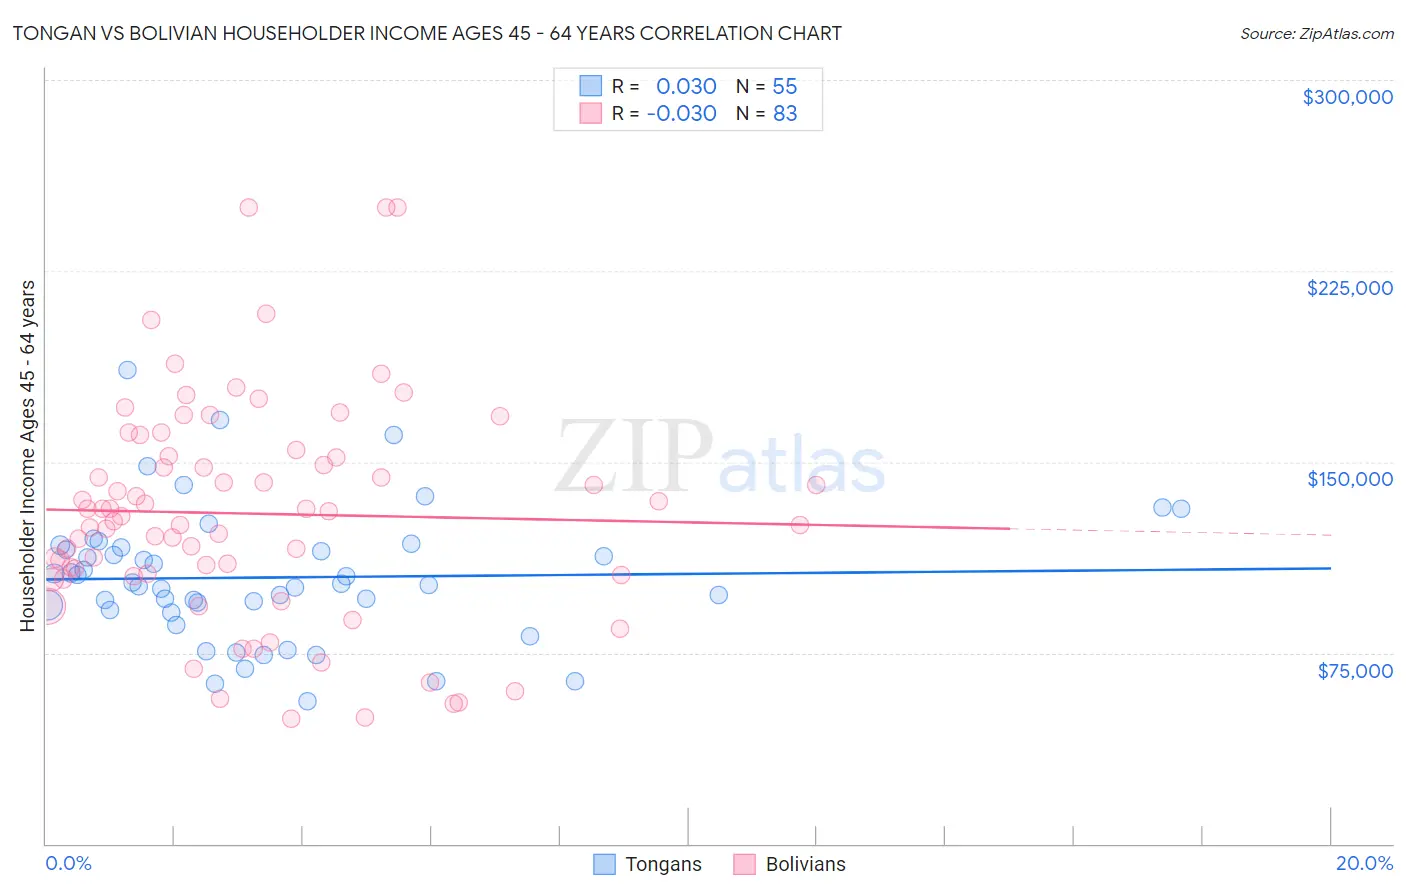 Tongan vs Bolivian Householder Income Ages 45 - 64 years